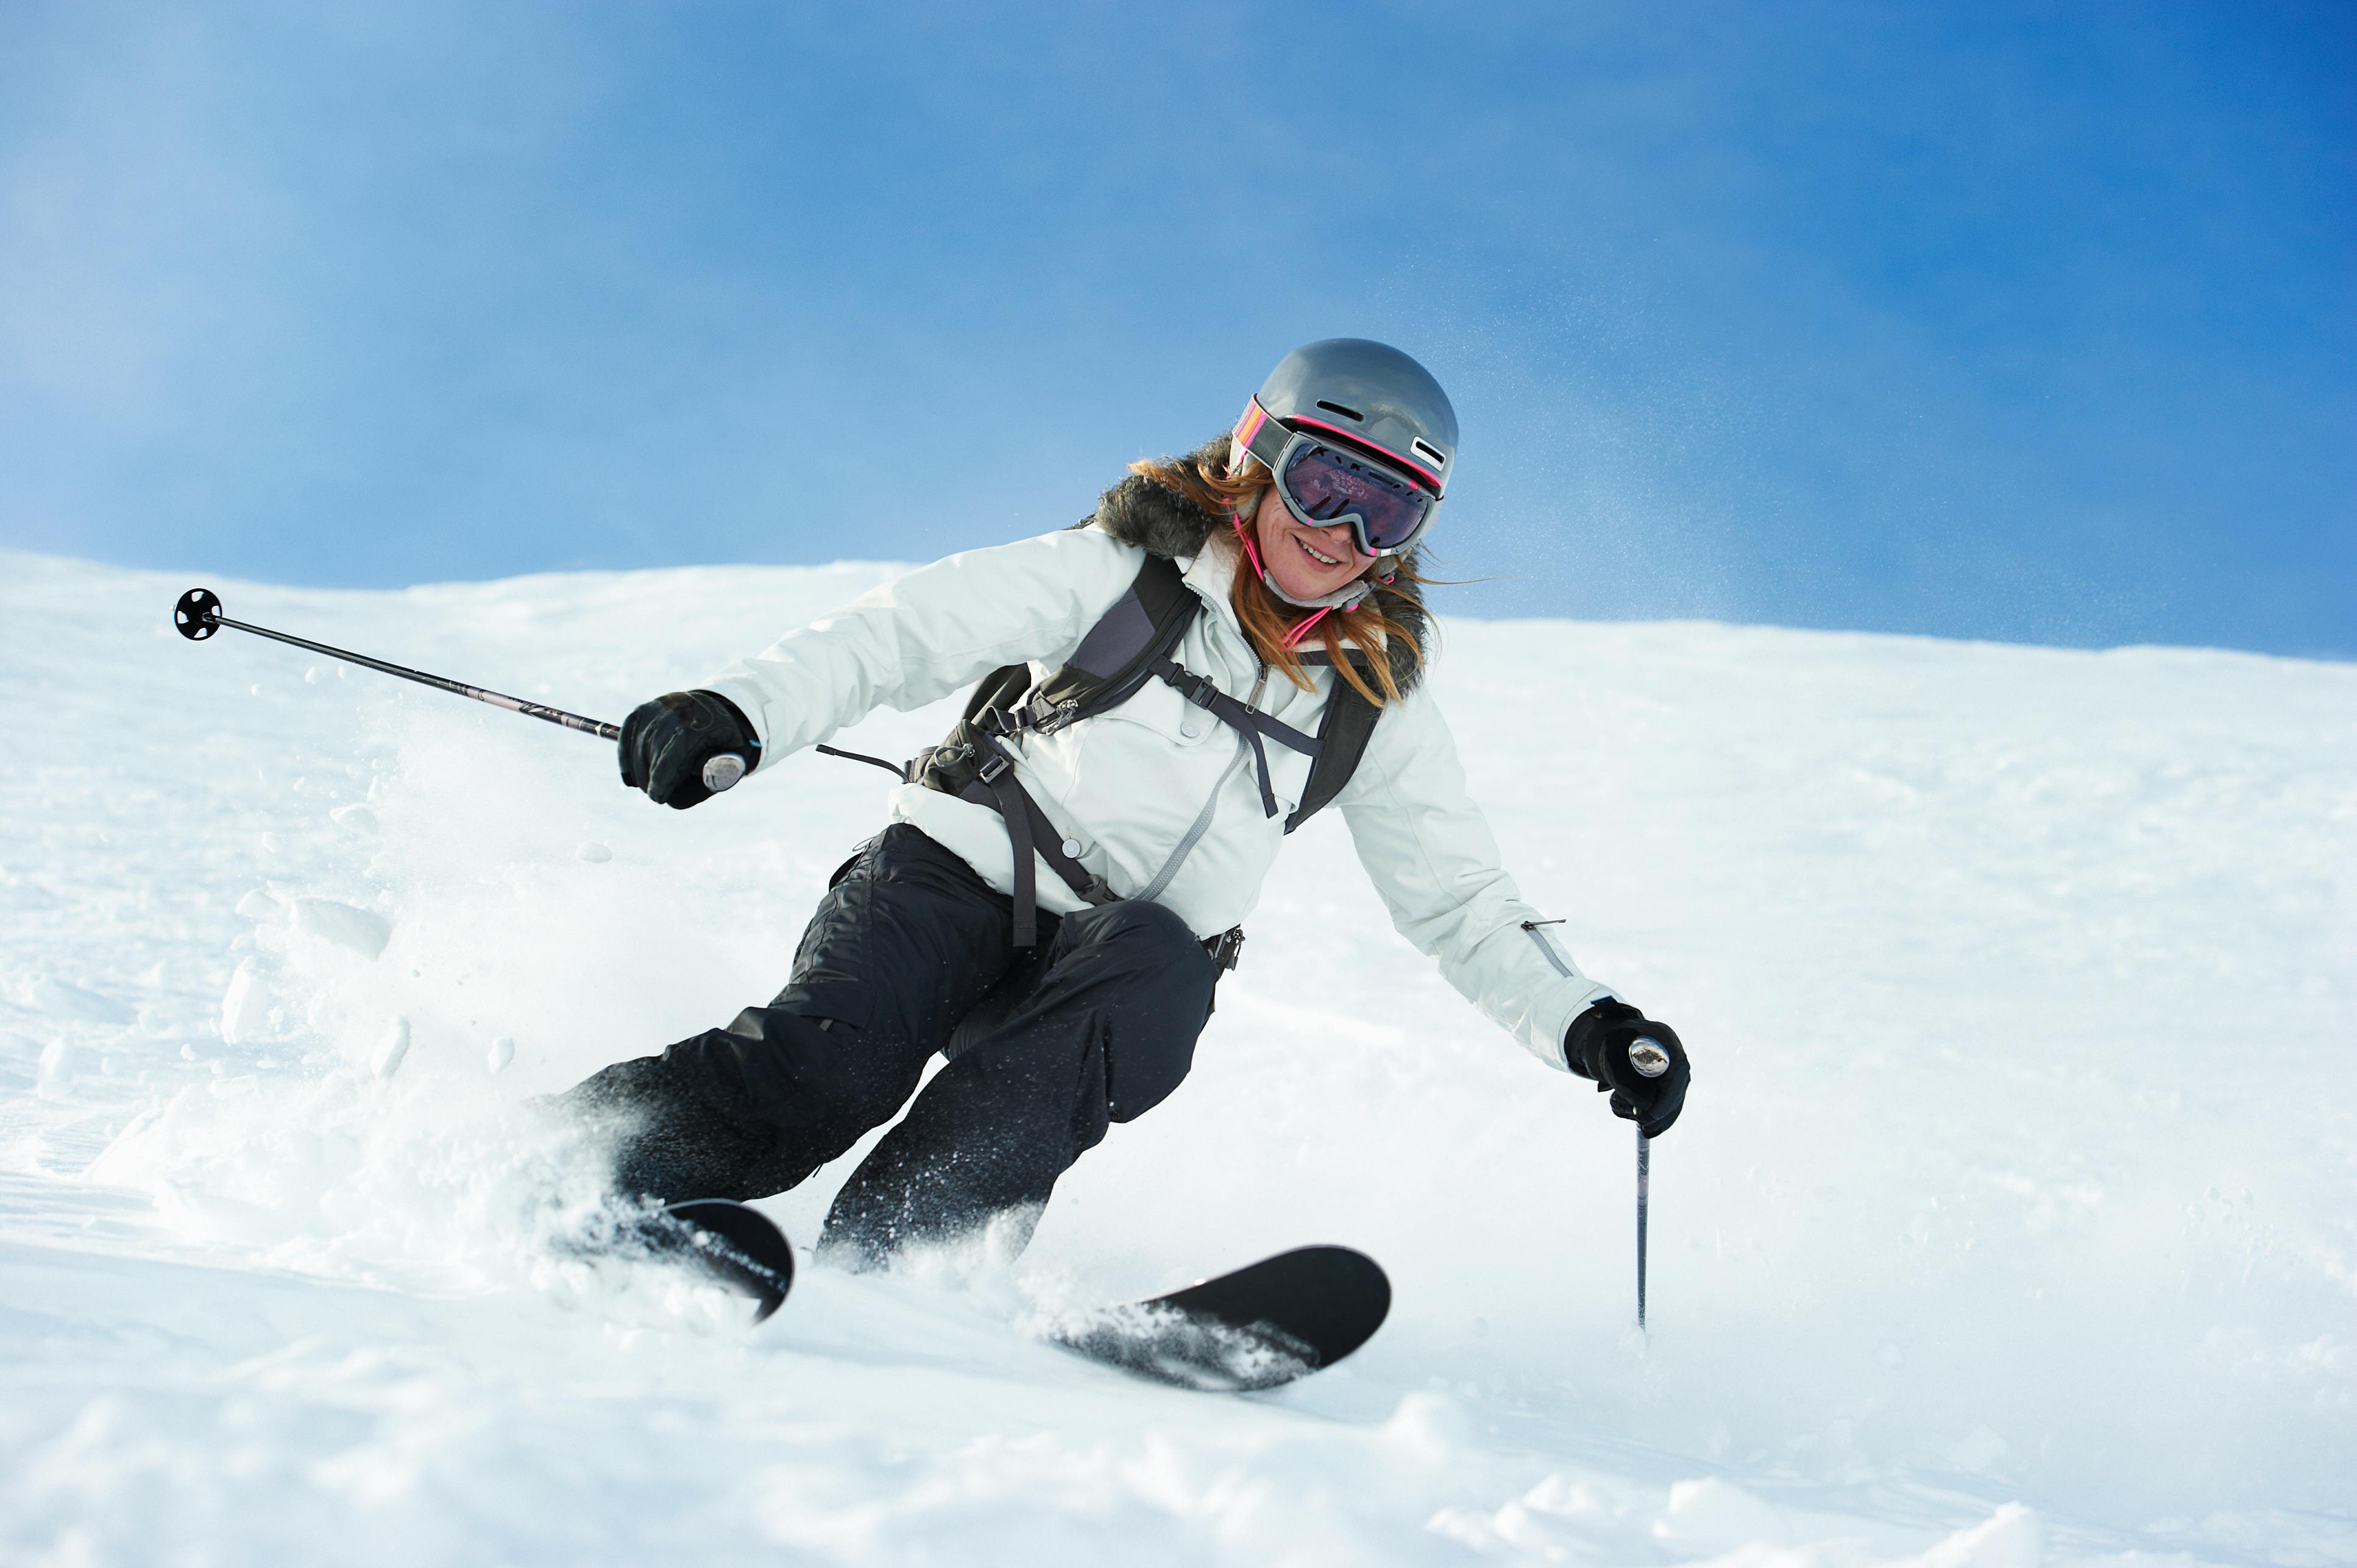 A woman in a white jacket and black pants smiles as she skis